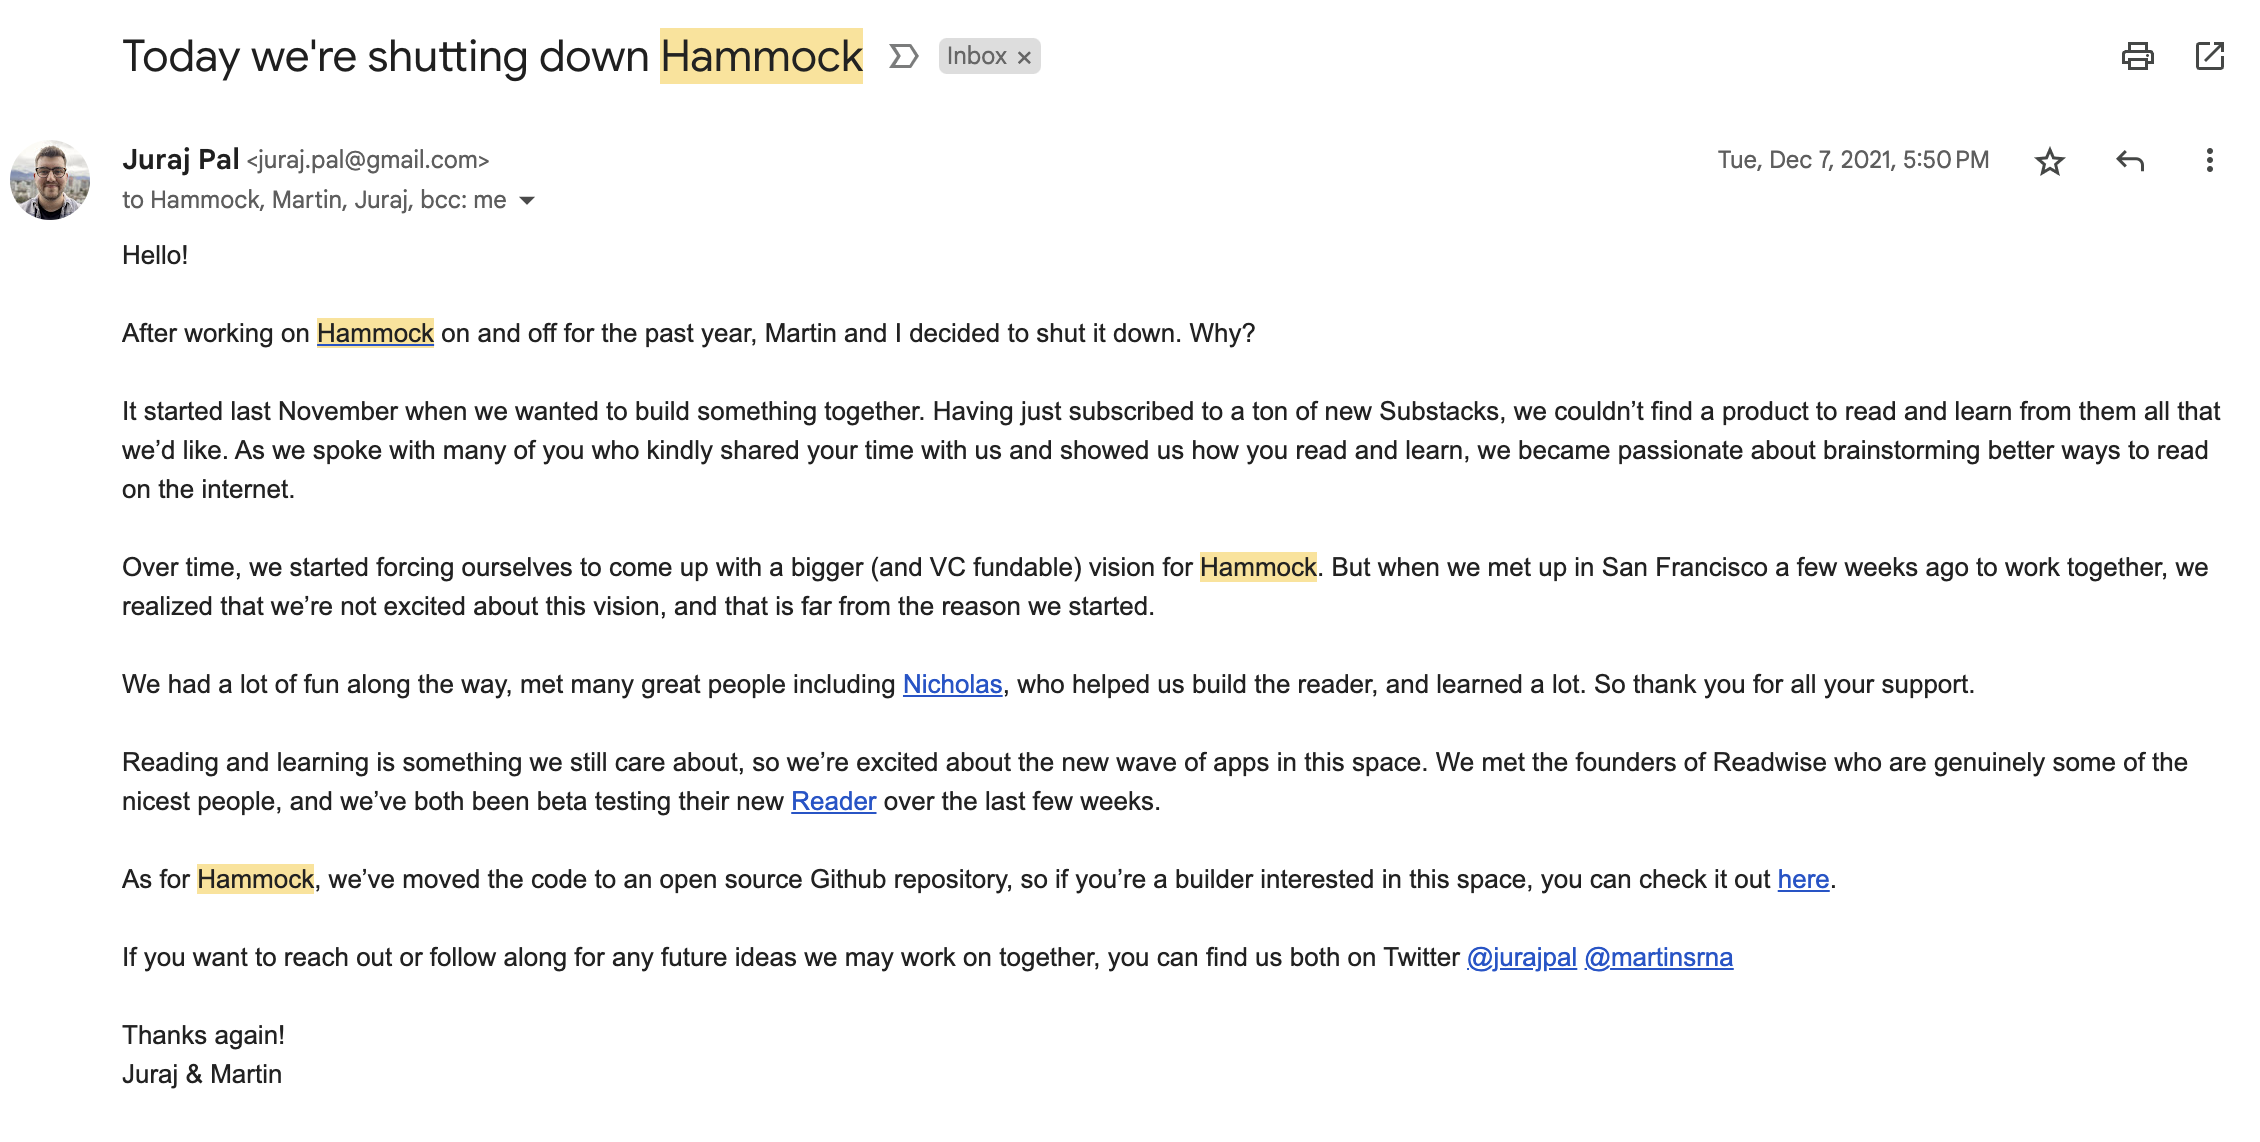 Saas Sunset Emails: Screenshot of Hammock's product sunset email